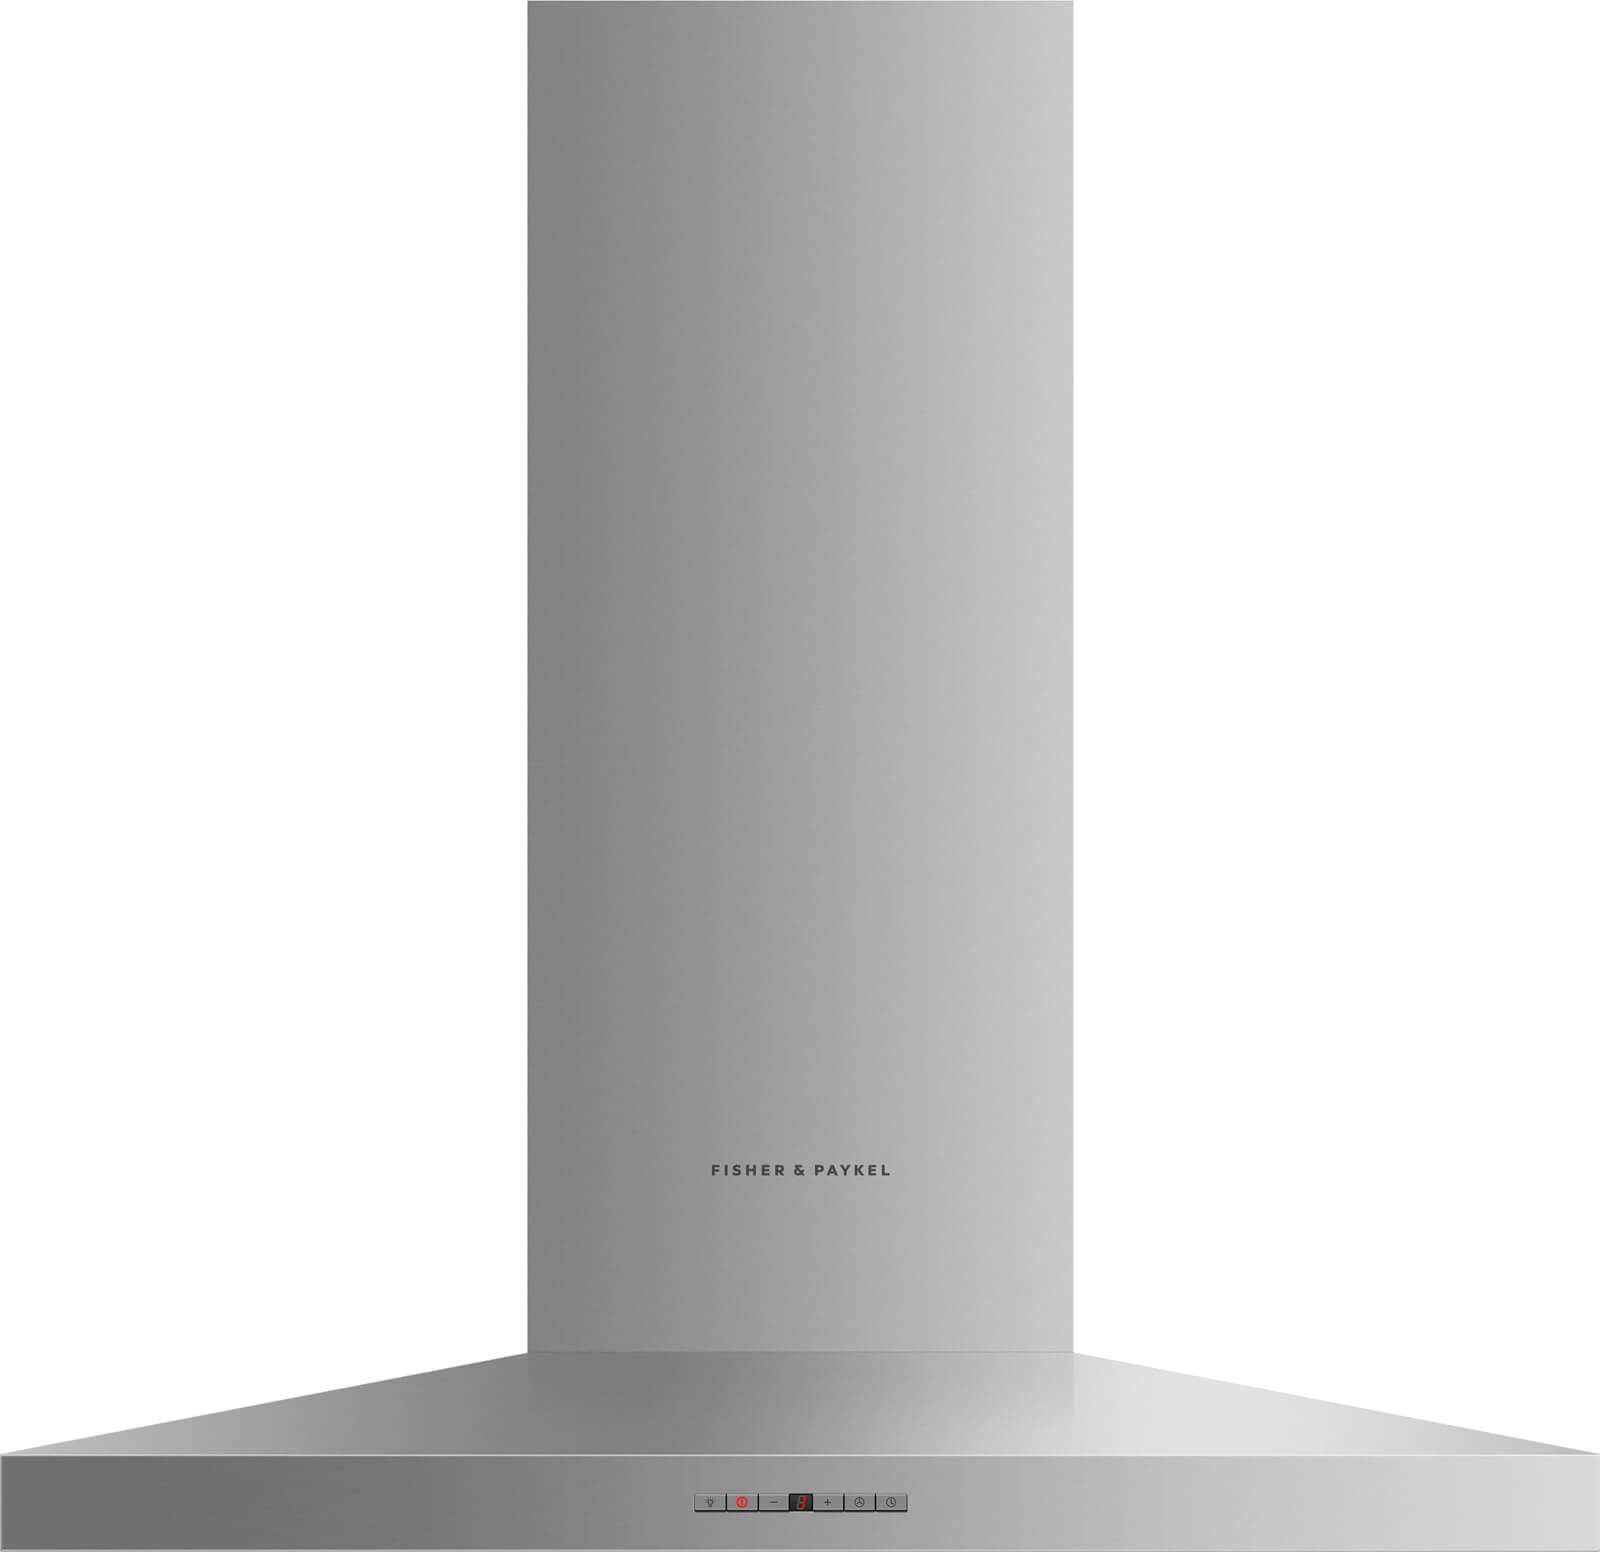 Fisher & Paykel Series 7 36" Stainless Steel Wall Chimney Ventilation Hood